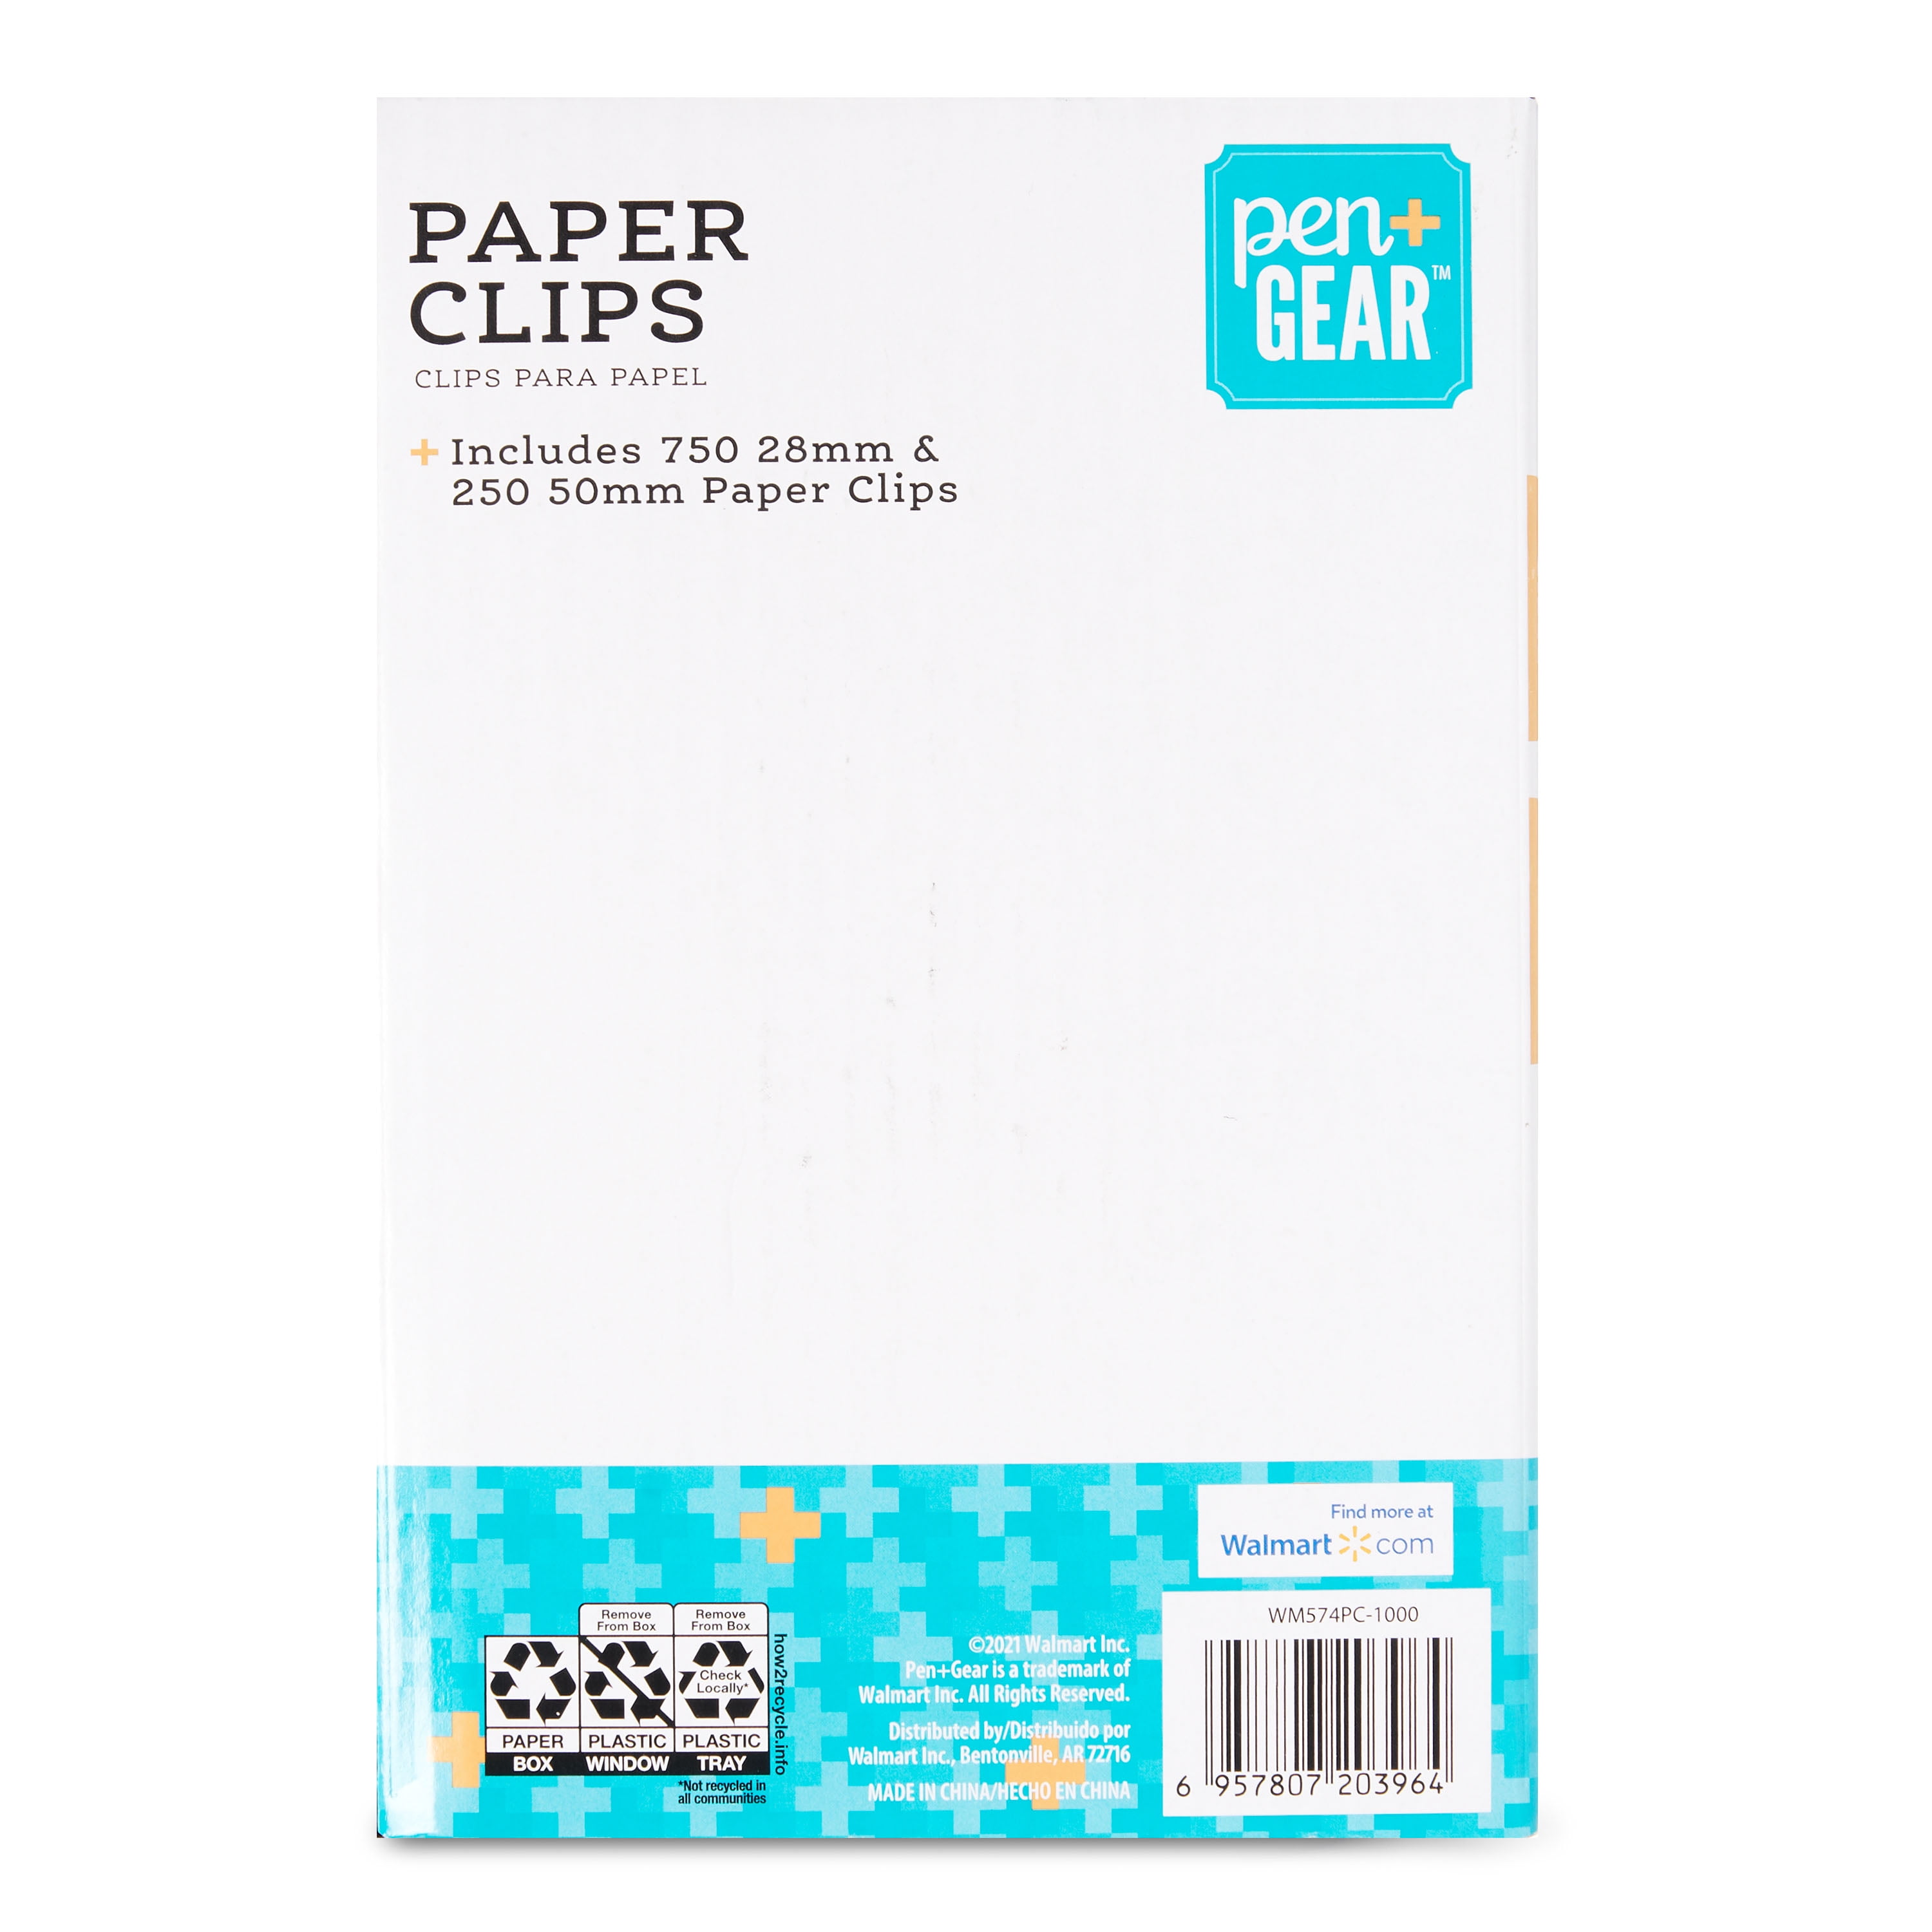 Pen + Gear Paper Clips, Assorted Sized, 28mm & 50mm, Silver